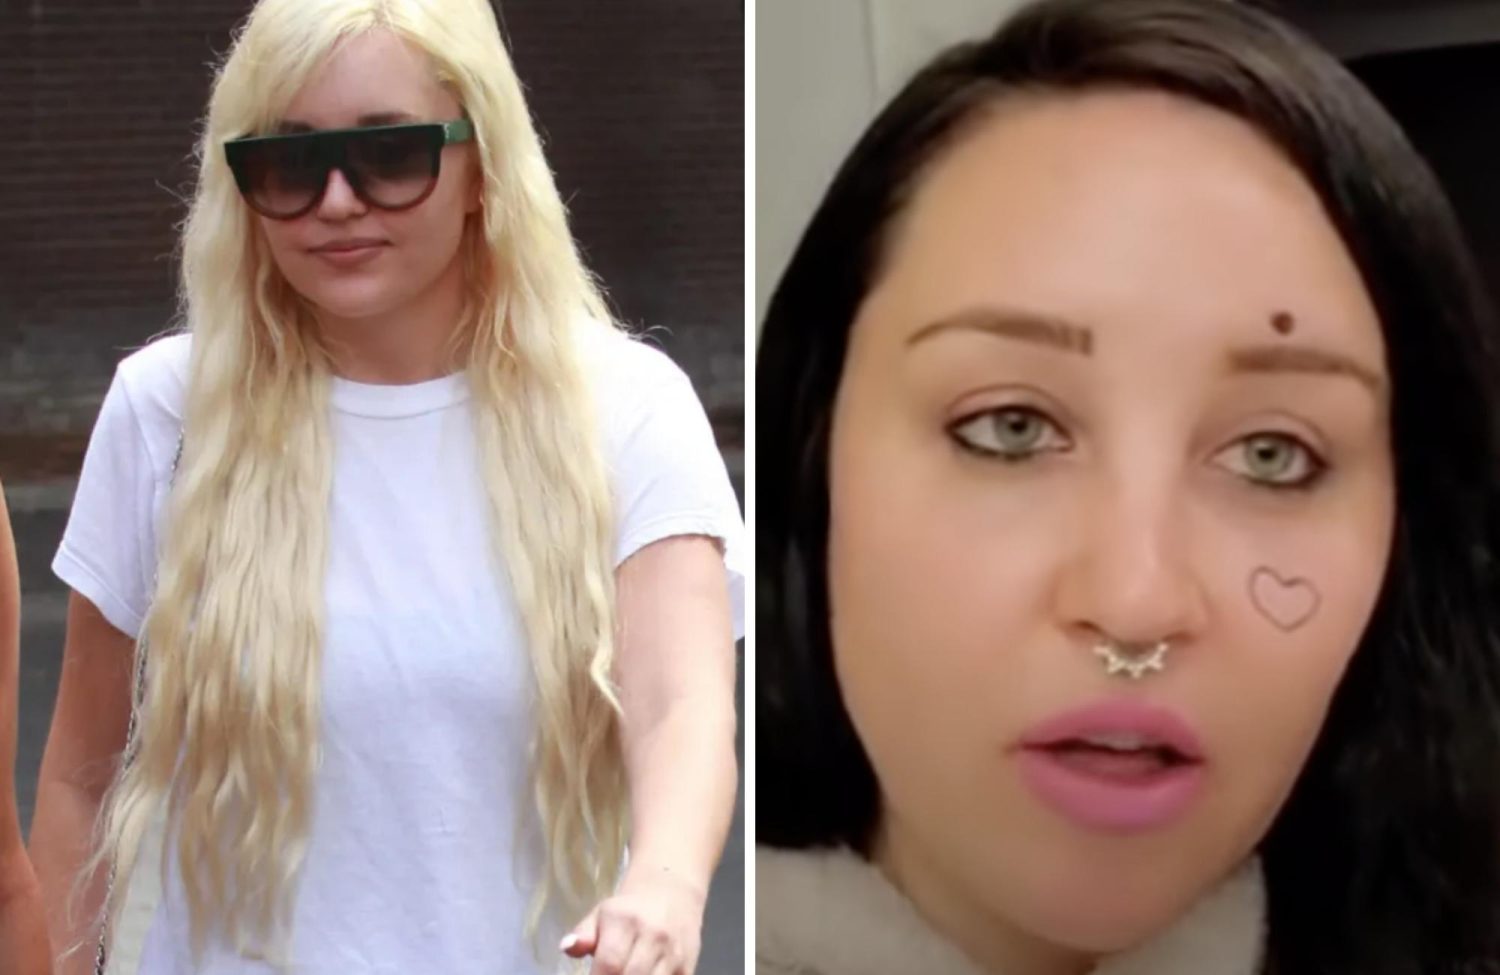 People Are Rallying Around Amanda Bynes After She Filed To End Her 9-year Conservatorship